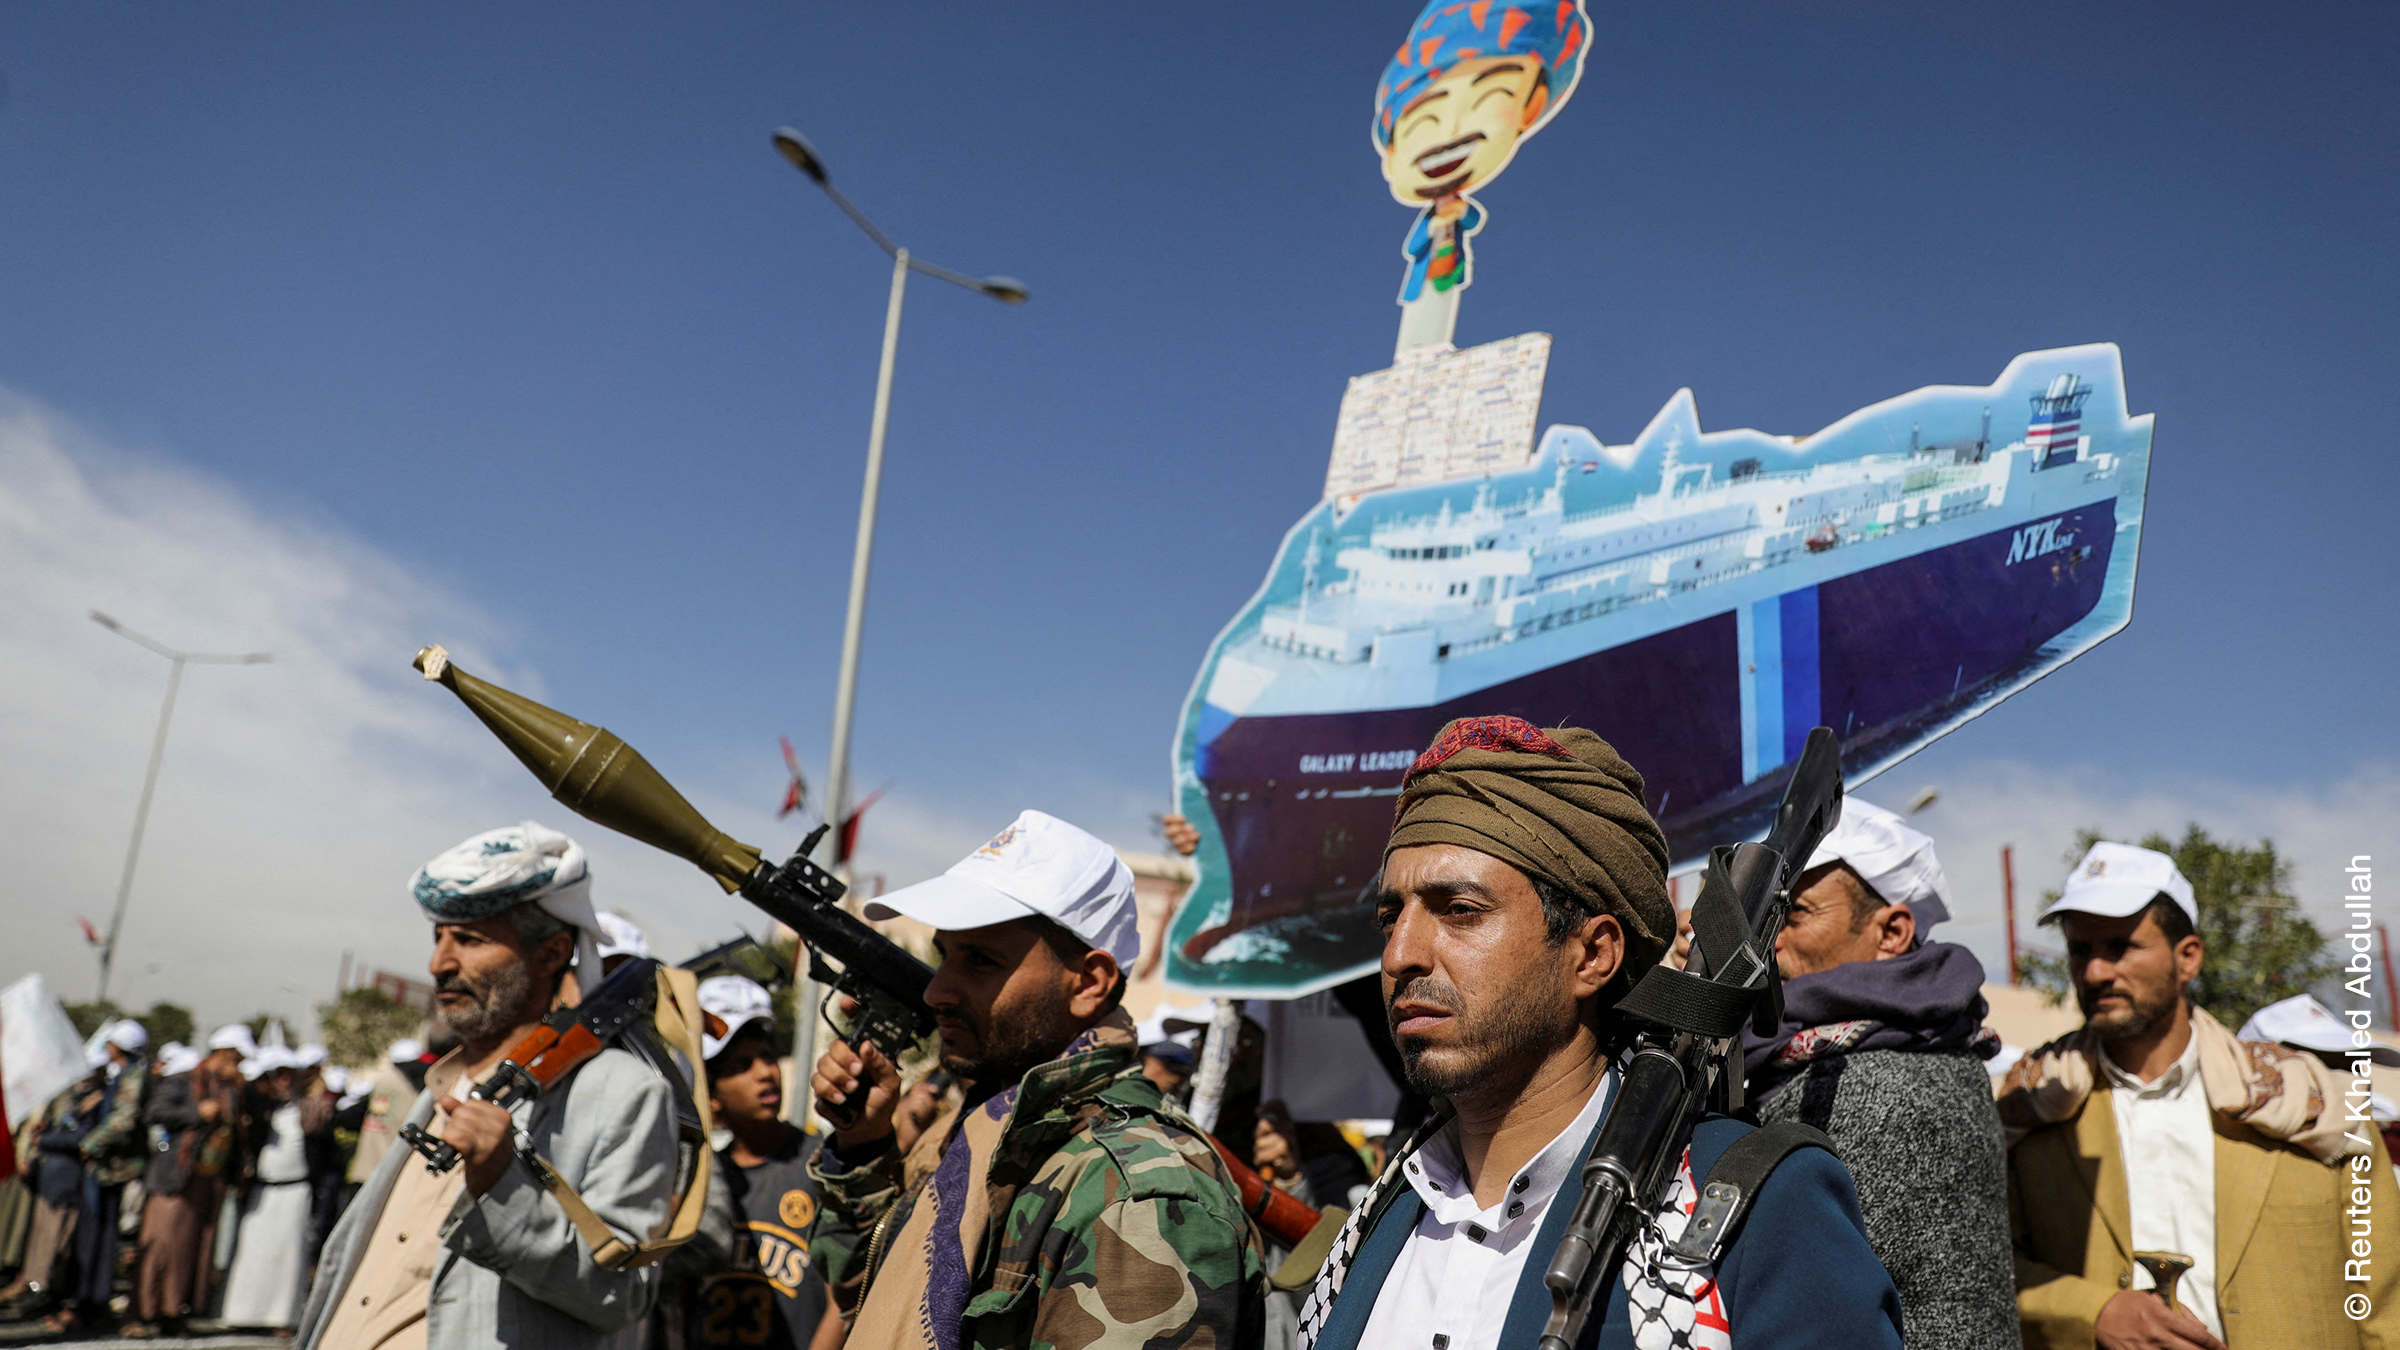 Houthi followers hold a cutout banner, portraying the Galaxy Leader cargo ship which was seized by Houthis, during a parade as part of a 'popular army' mobilization campaign by the movement, in Sanaa, Yemen, February 7, 2024. REUTERS/Khaled Abdullah